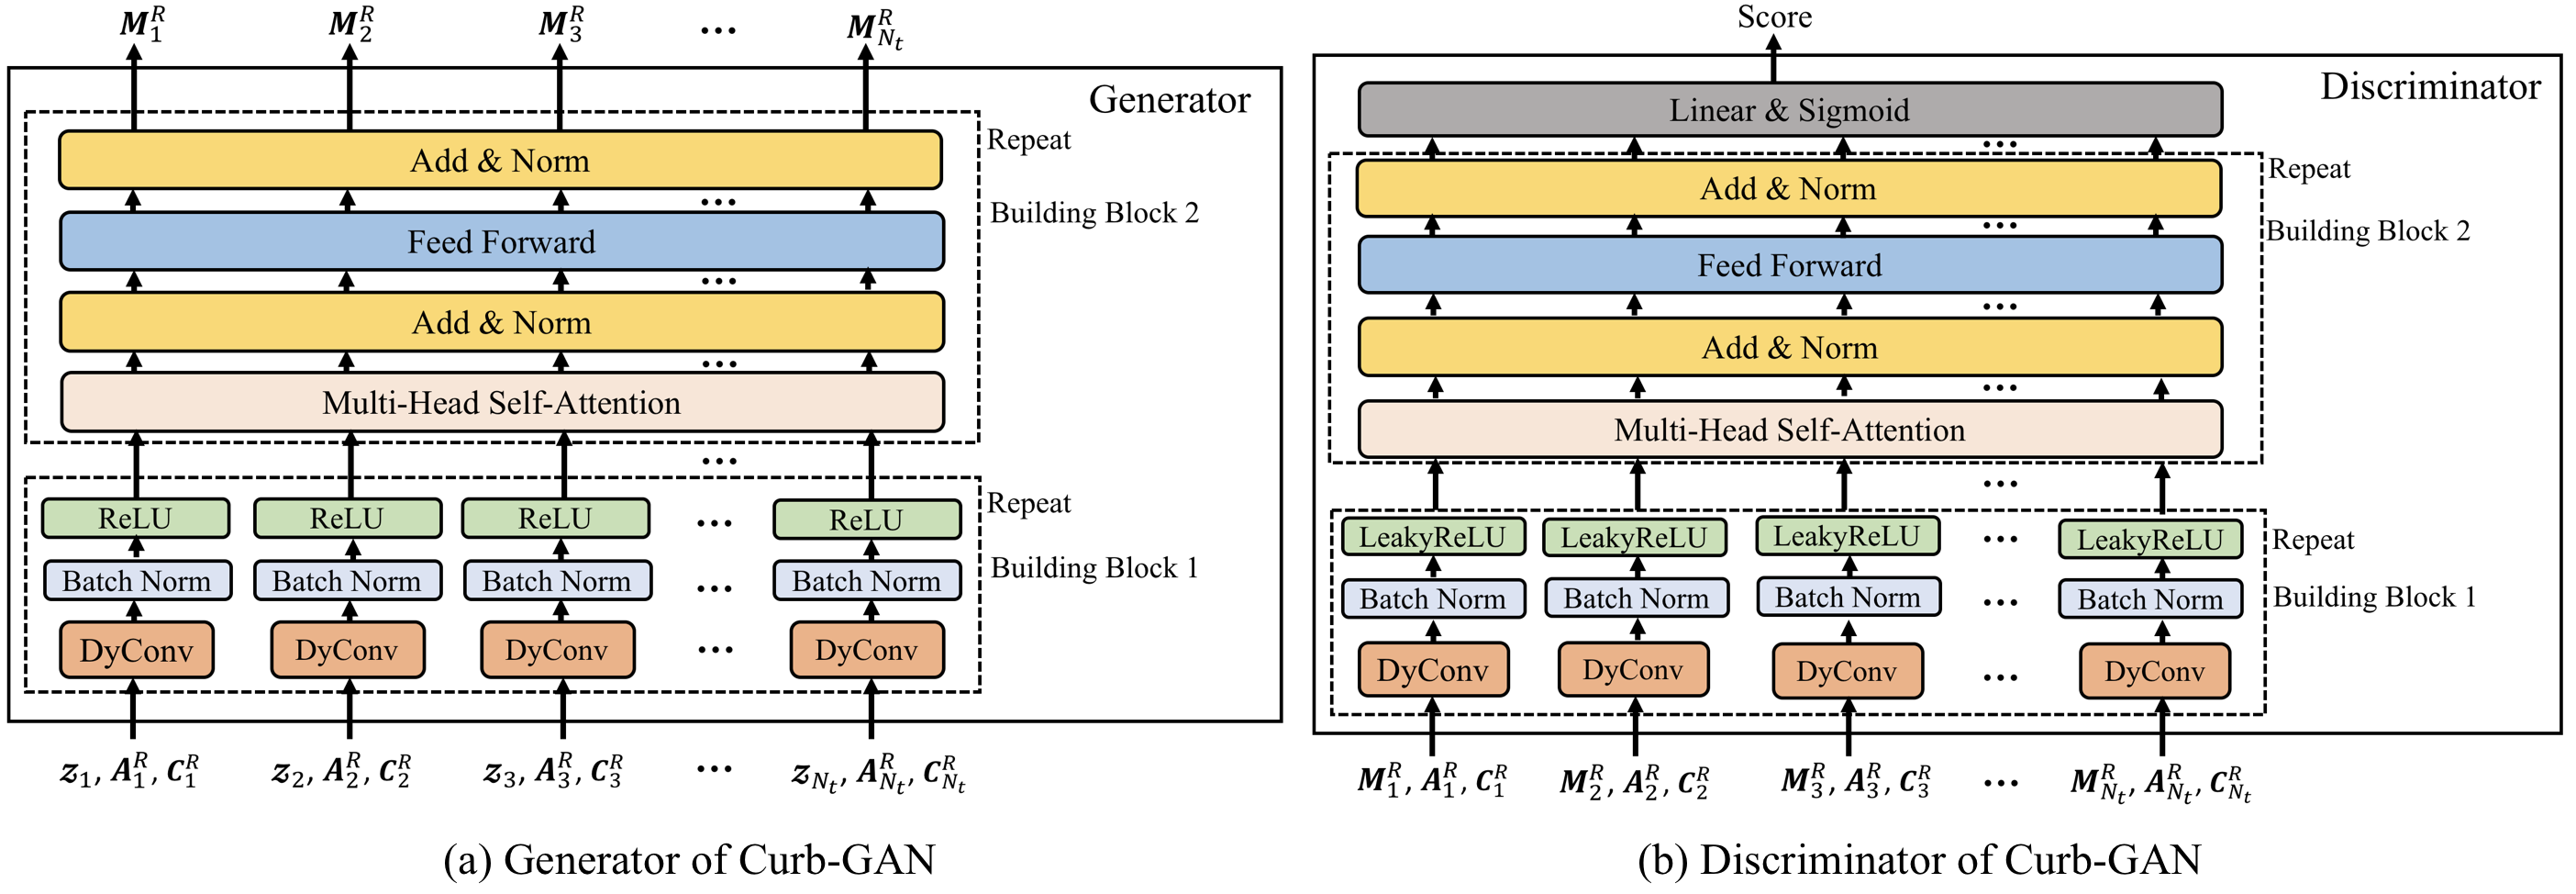 Overview of Curb_GAN